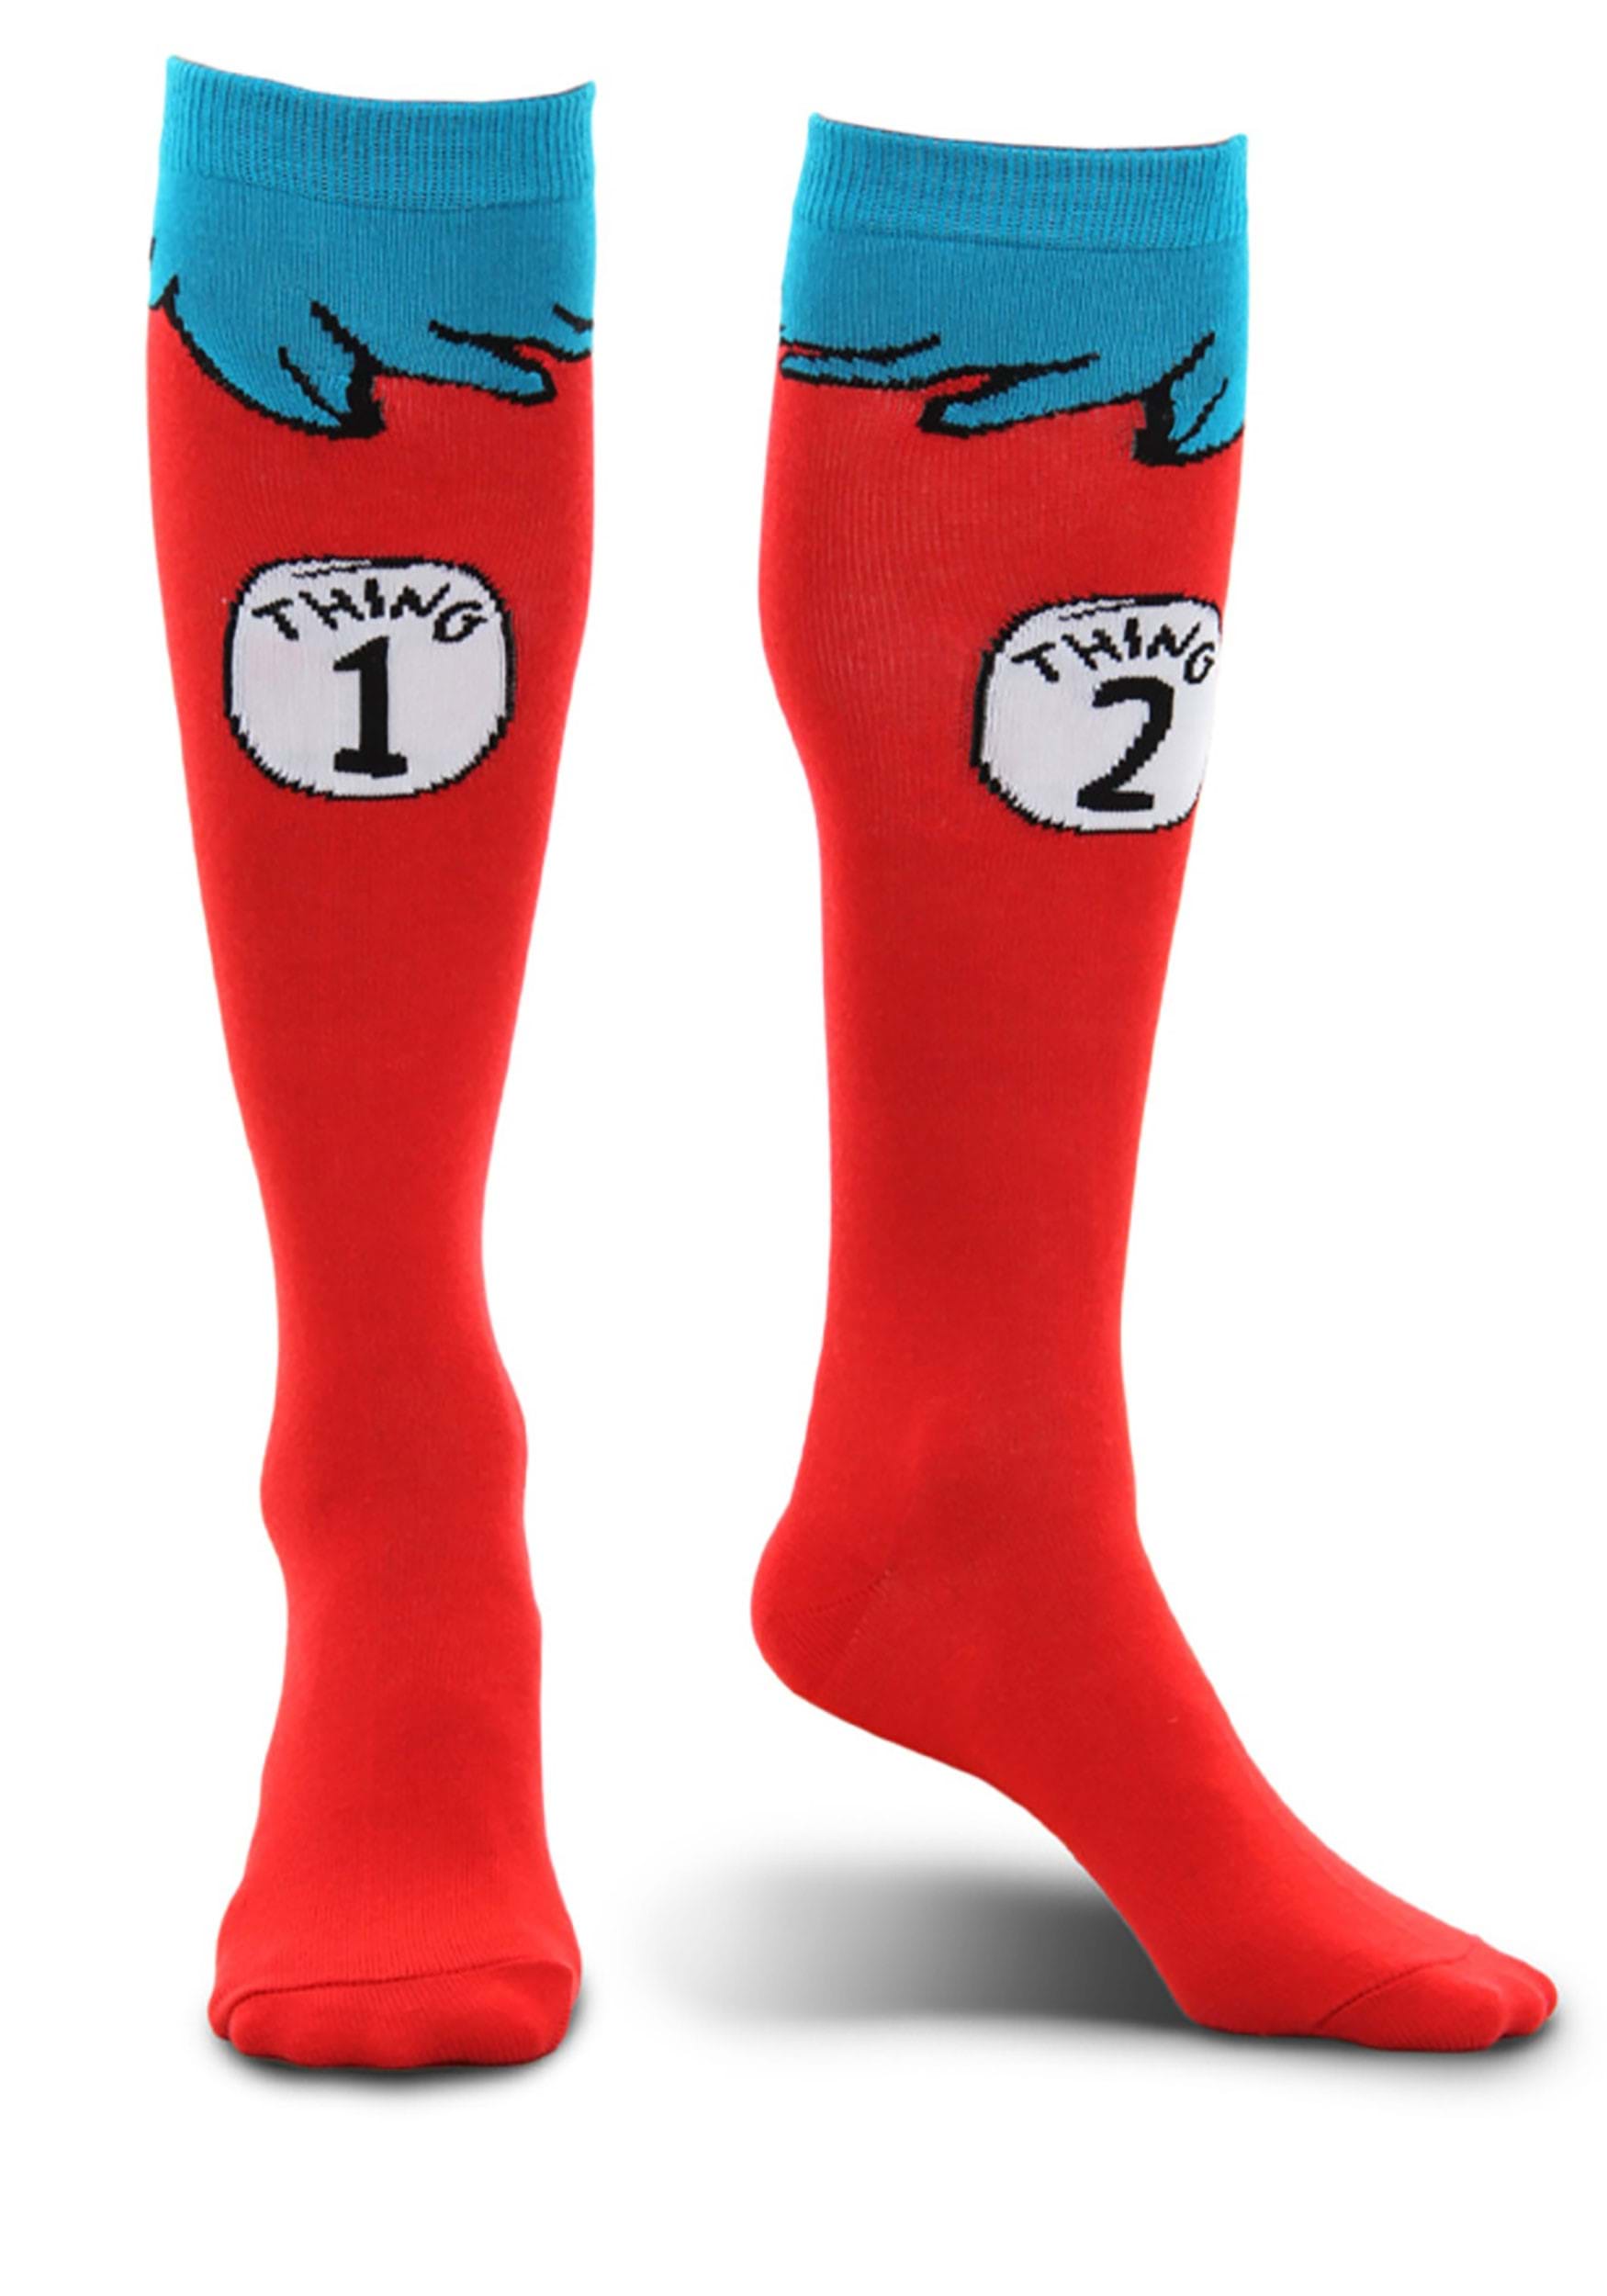 Thing 1 and 2 Costume Adult Socks